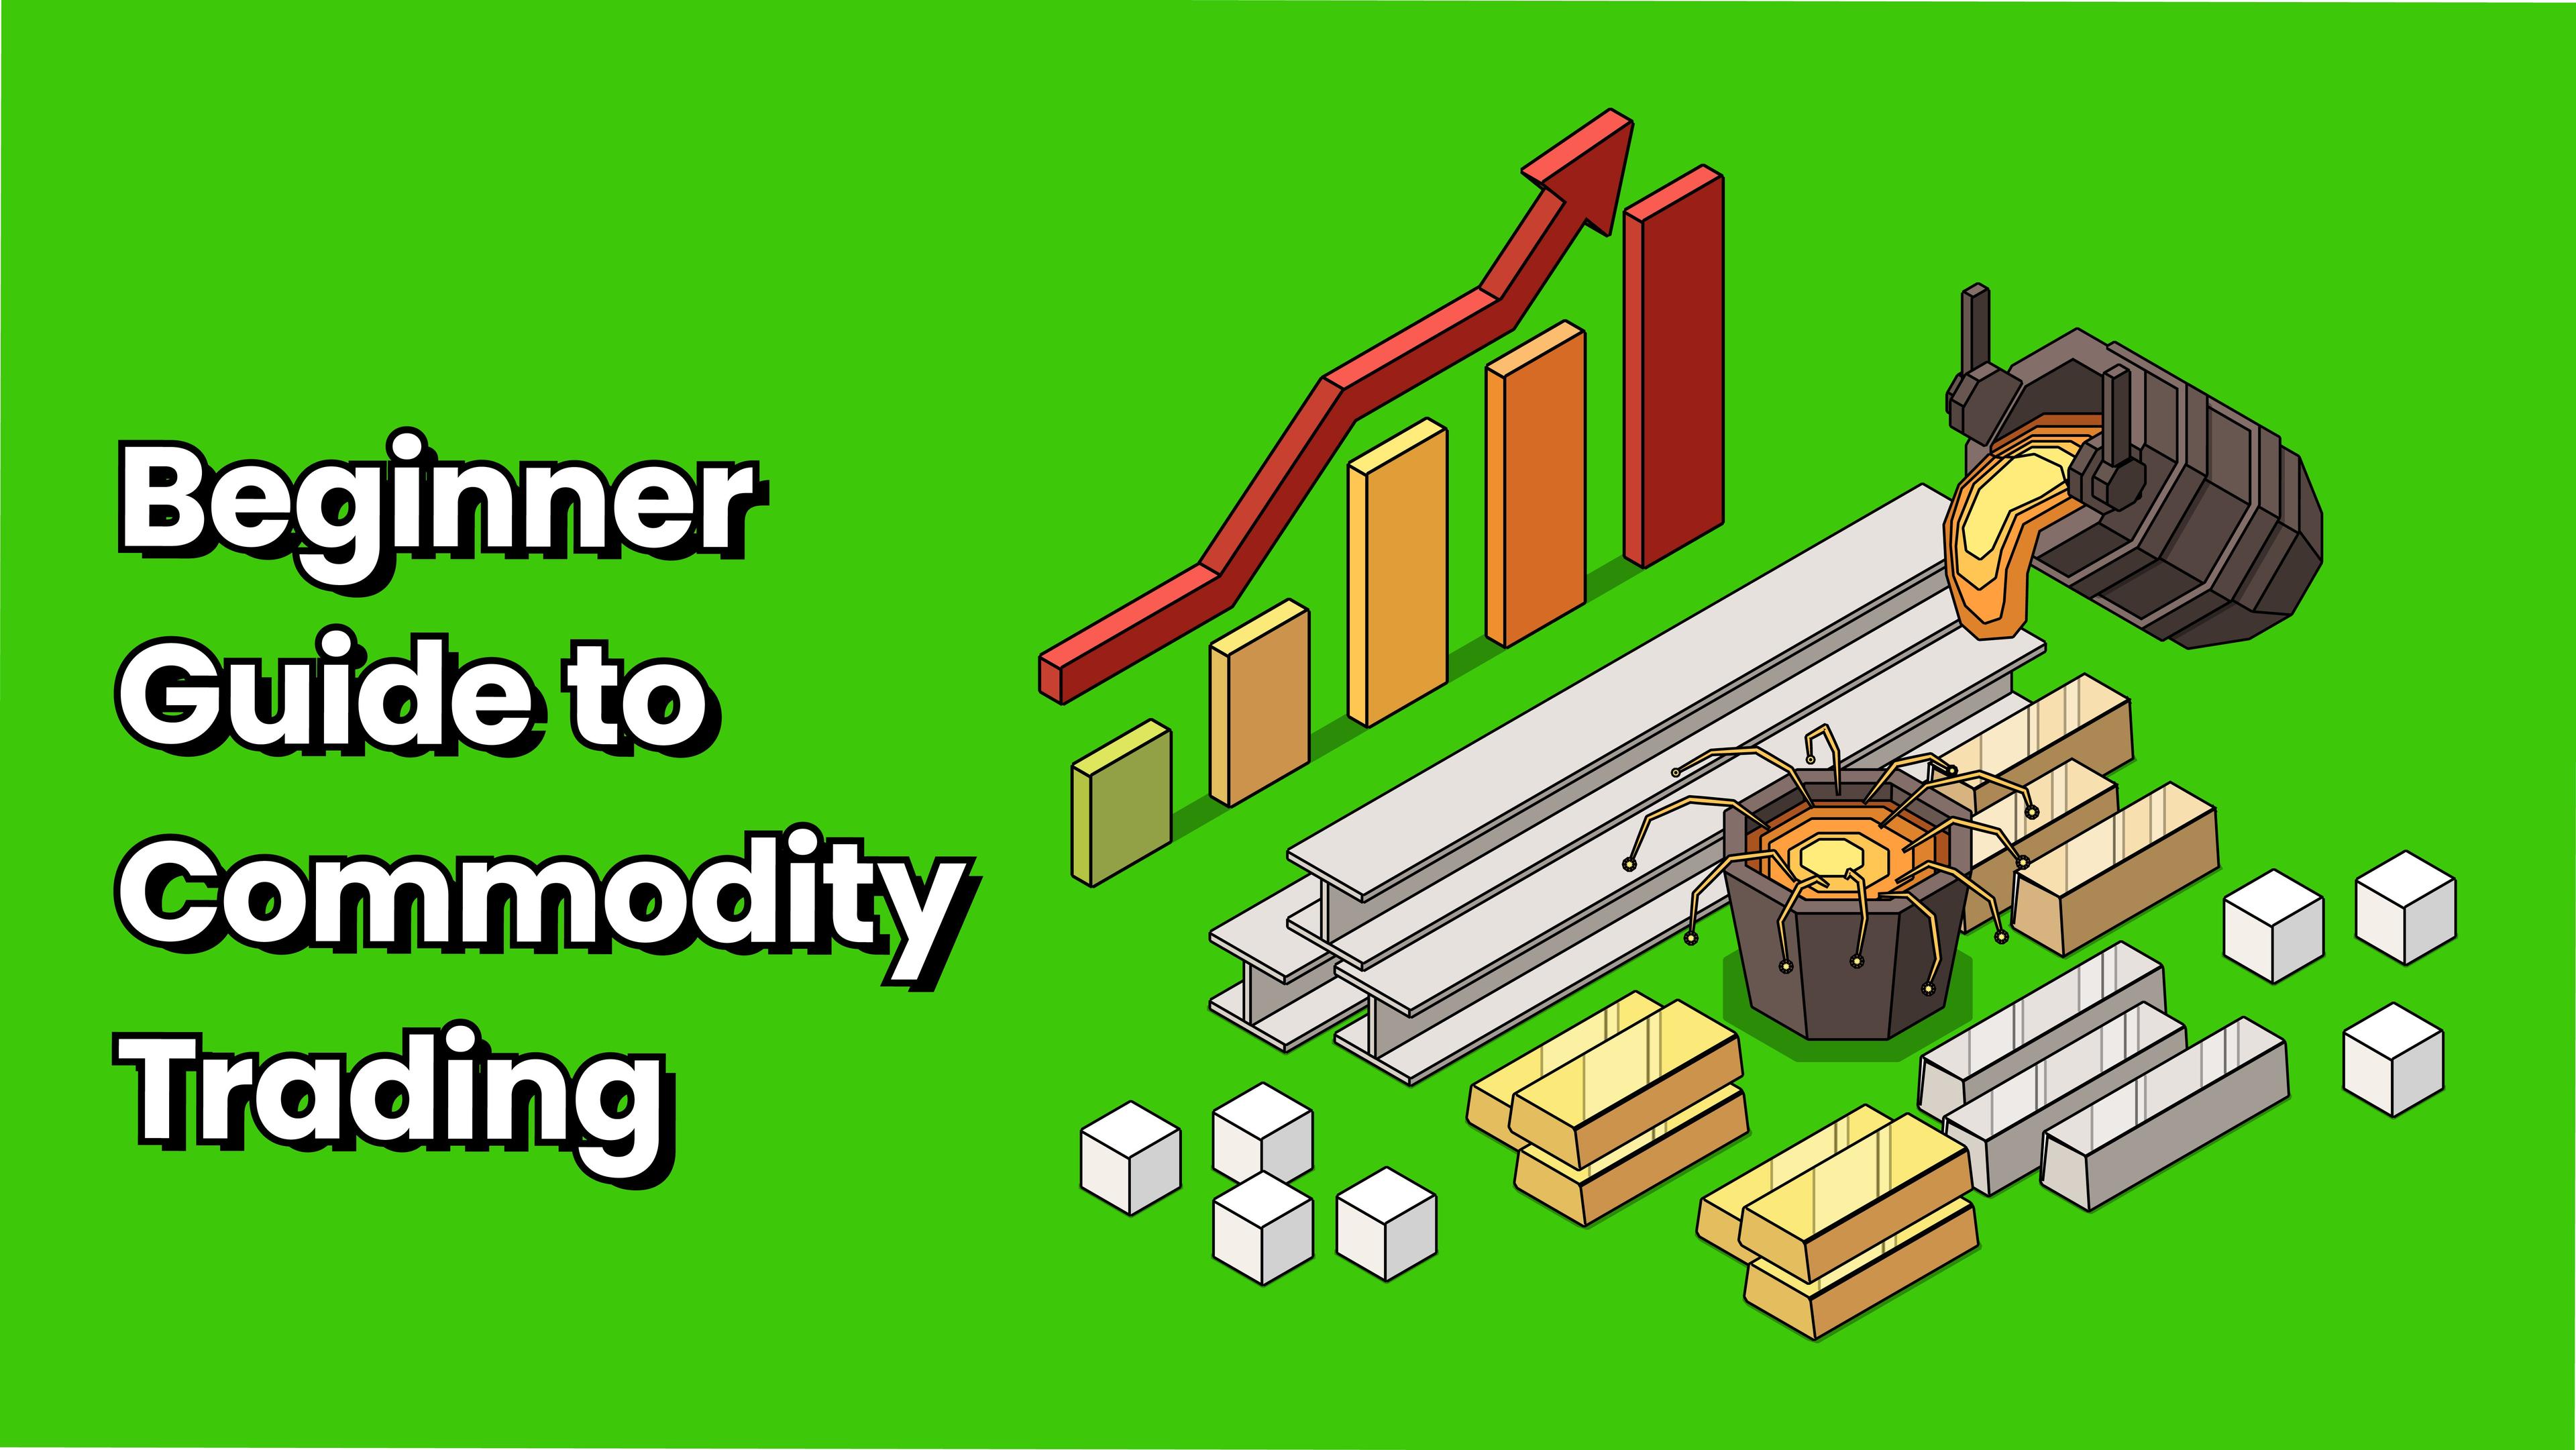 Beginner-Guide-to-Commodity-Trading-Feature-Image-7eMtN.png